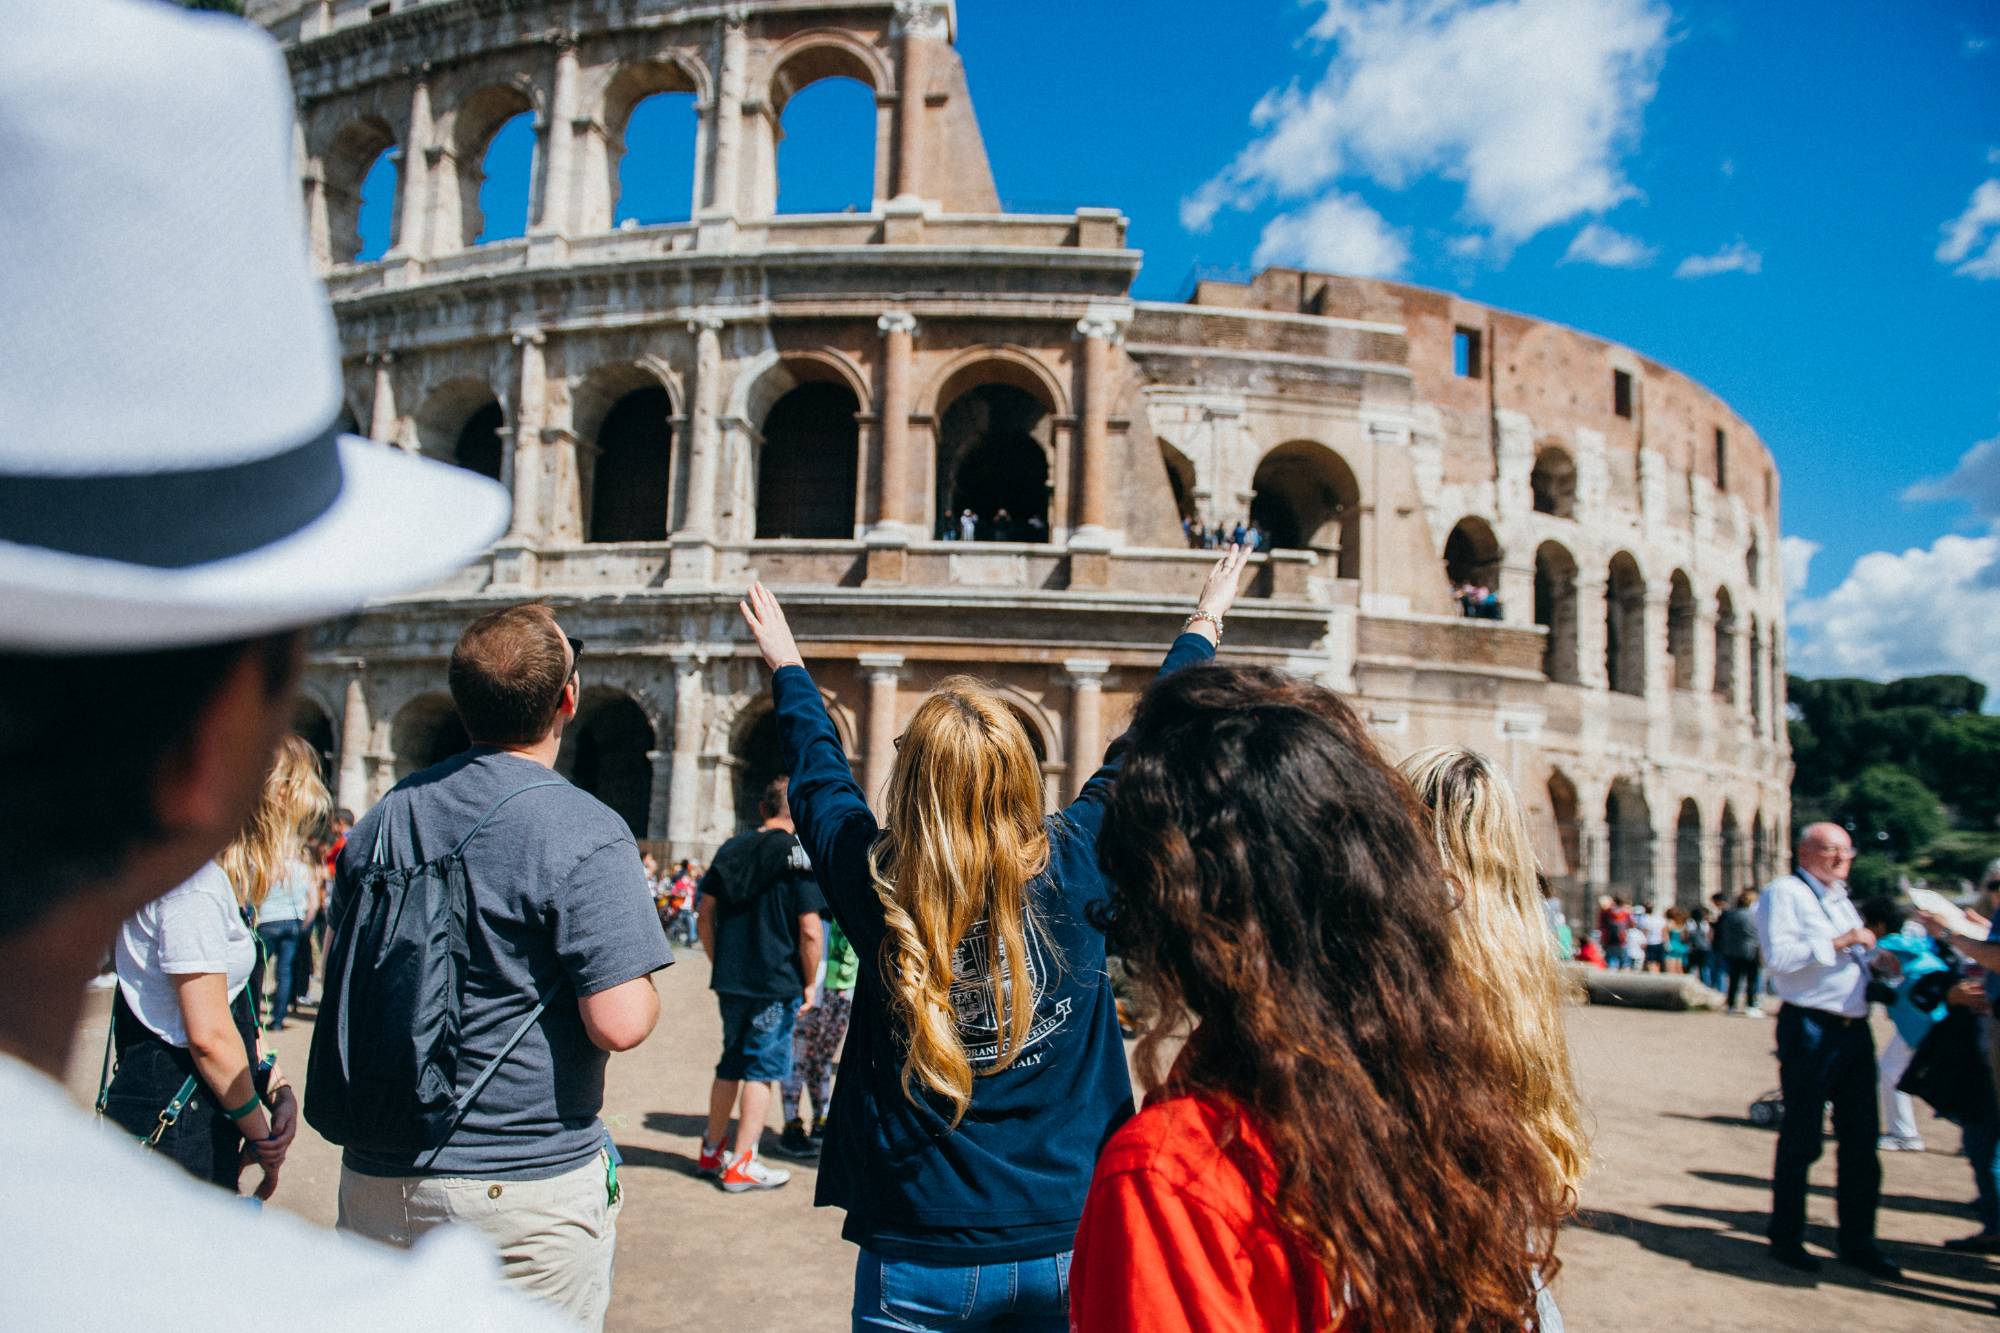 Students in front of the colosseum in Rome, Italy